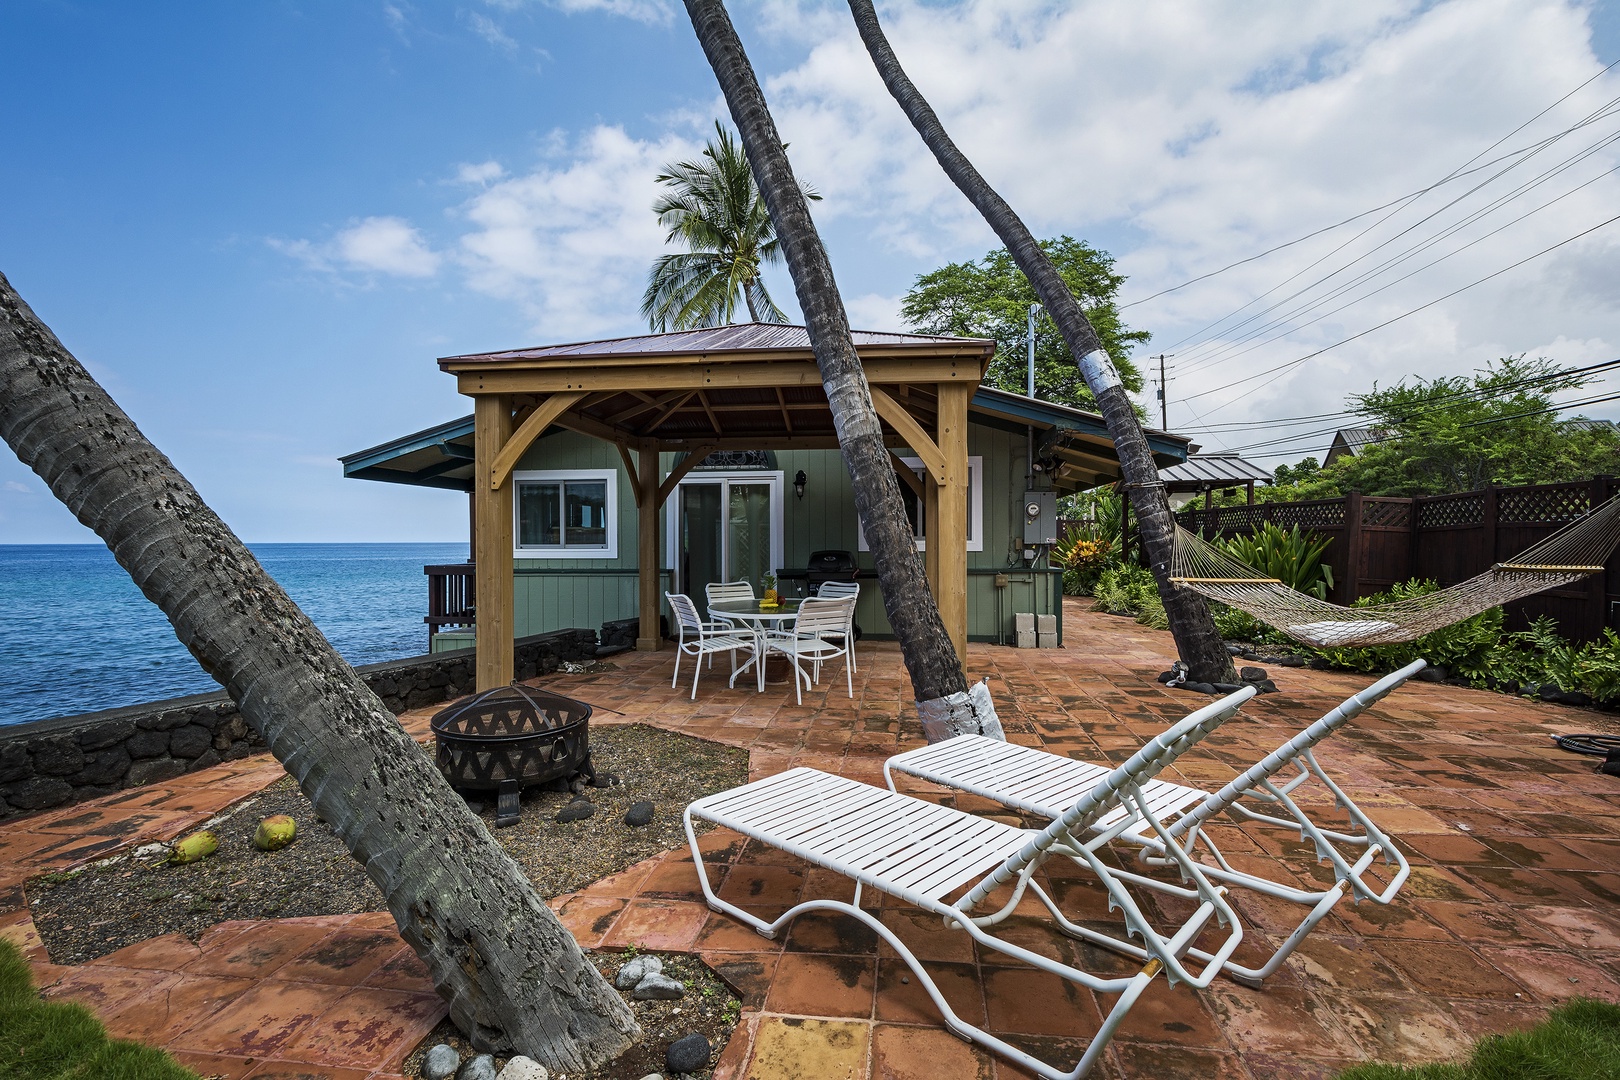 Kailua Kona Vacation Rentals, The Cottage - Relax in the lounge chairs and take in all Hawaii has to offer!